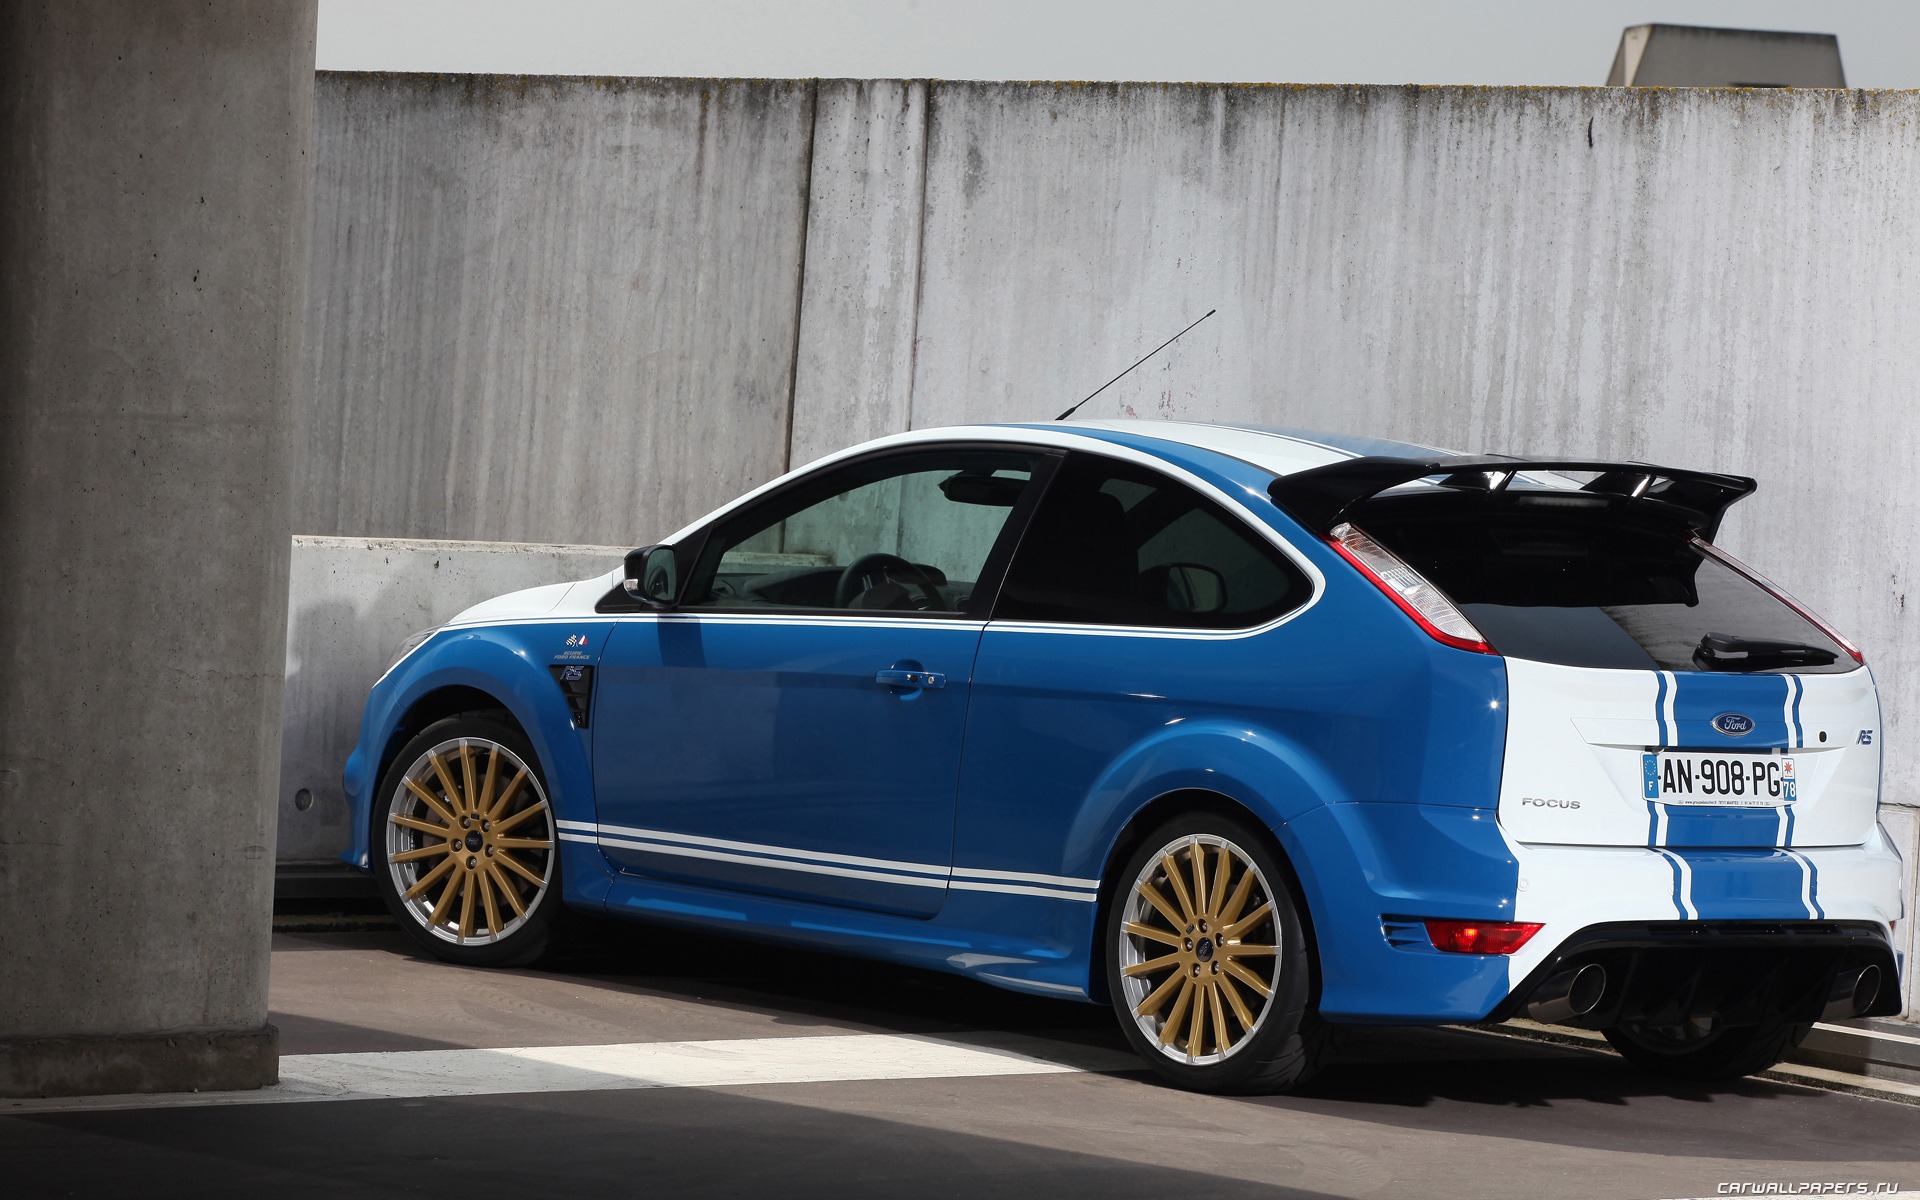 Ford Focus RS Le Mans Classic - 2010 HD Wallpaper #5 - 1920x1200